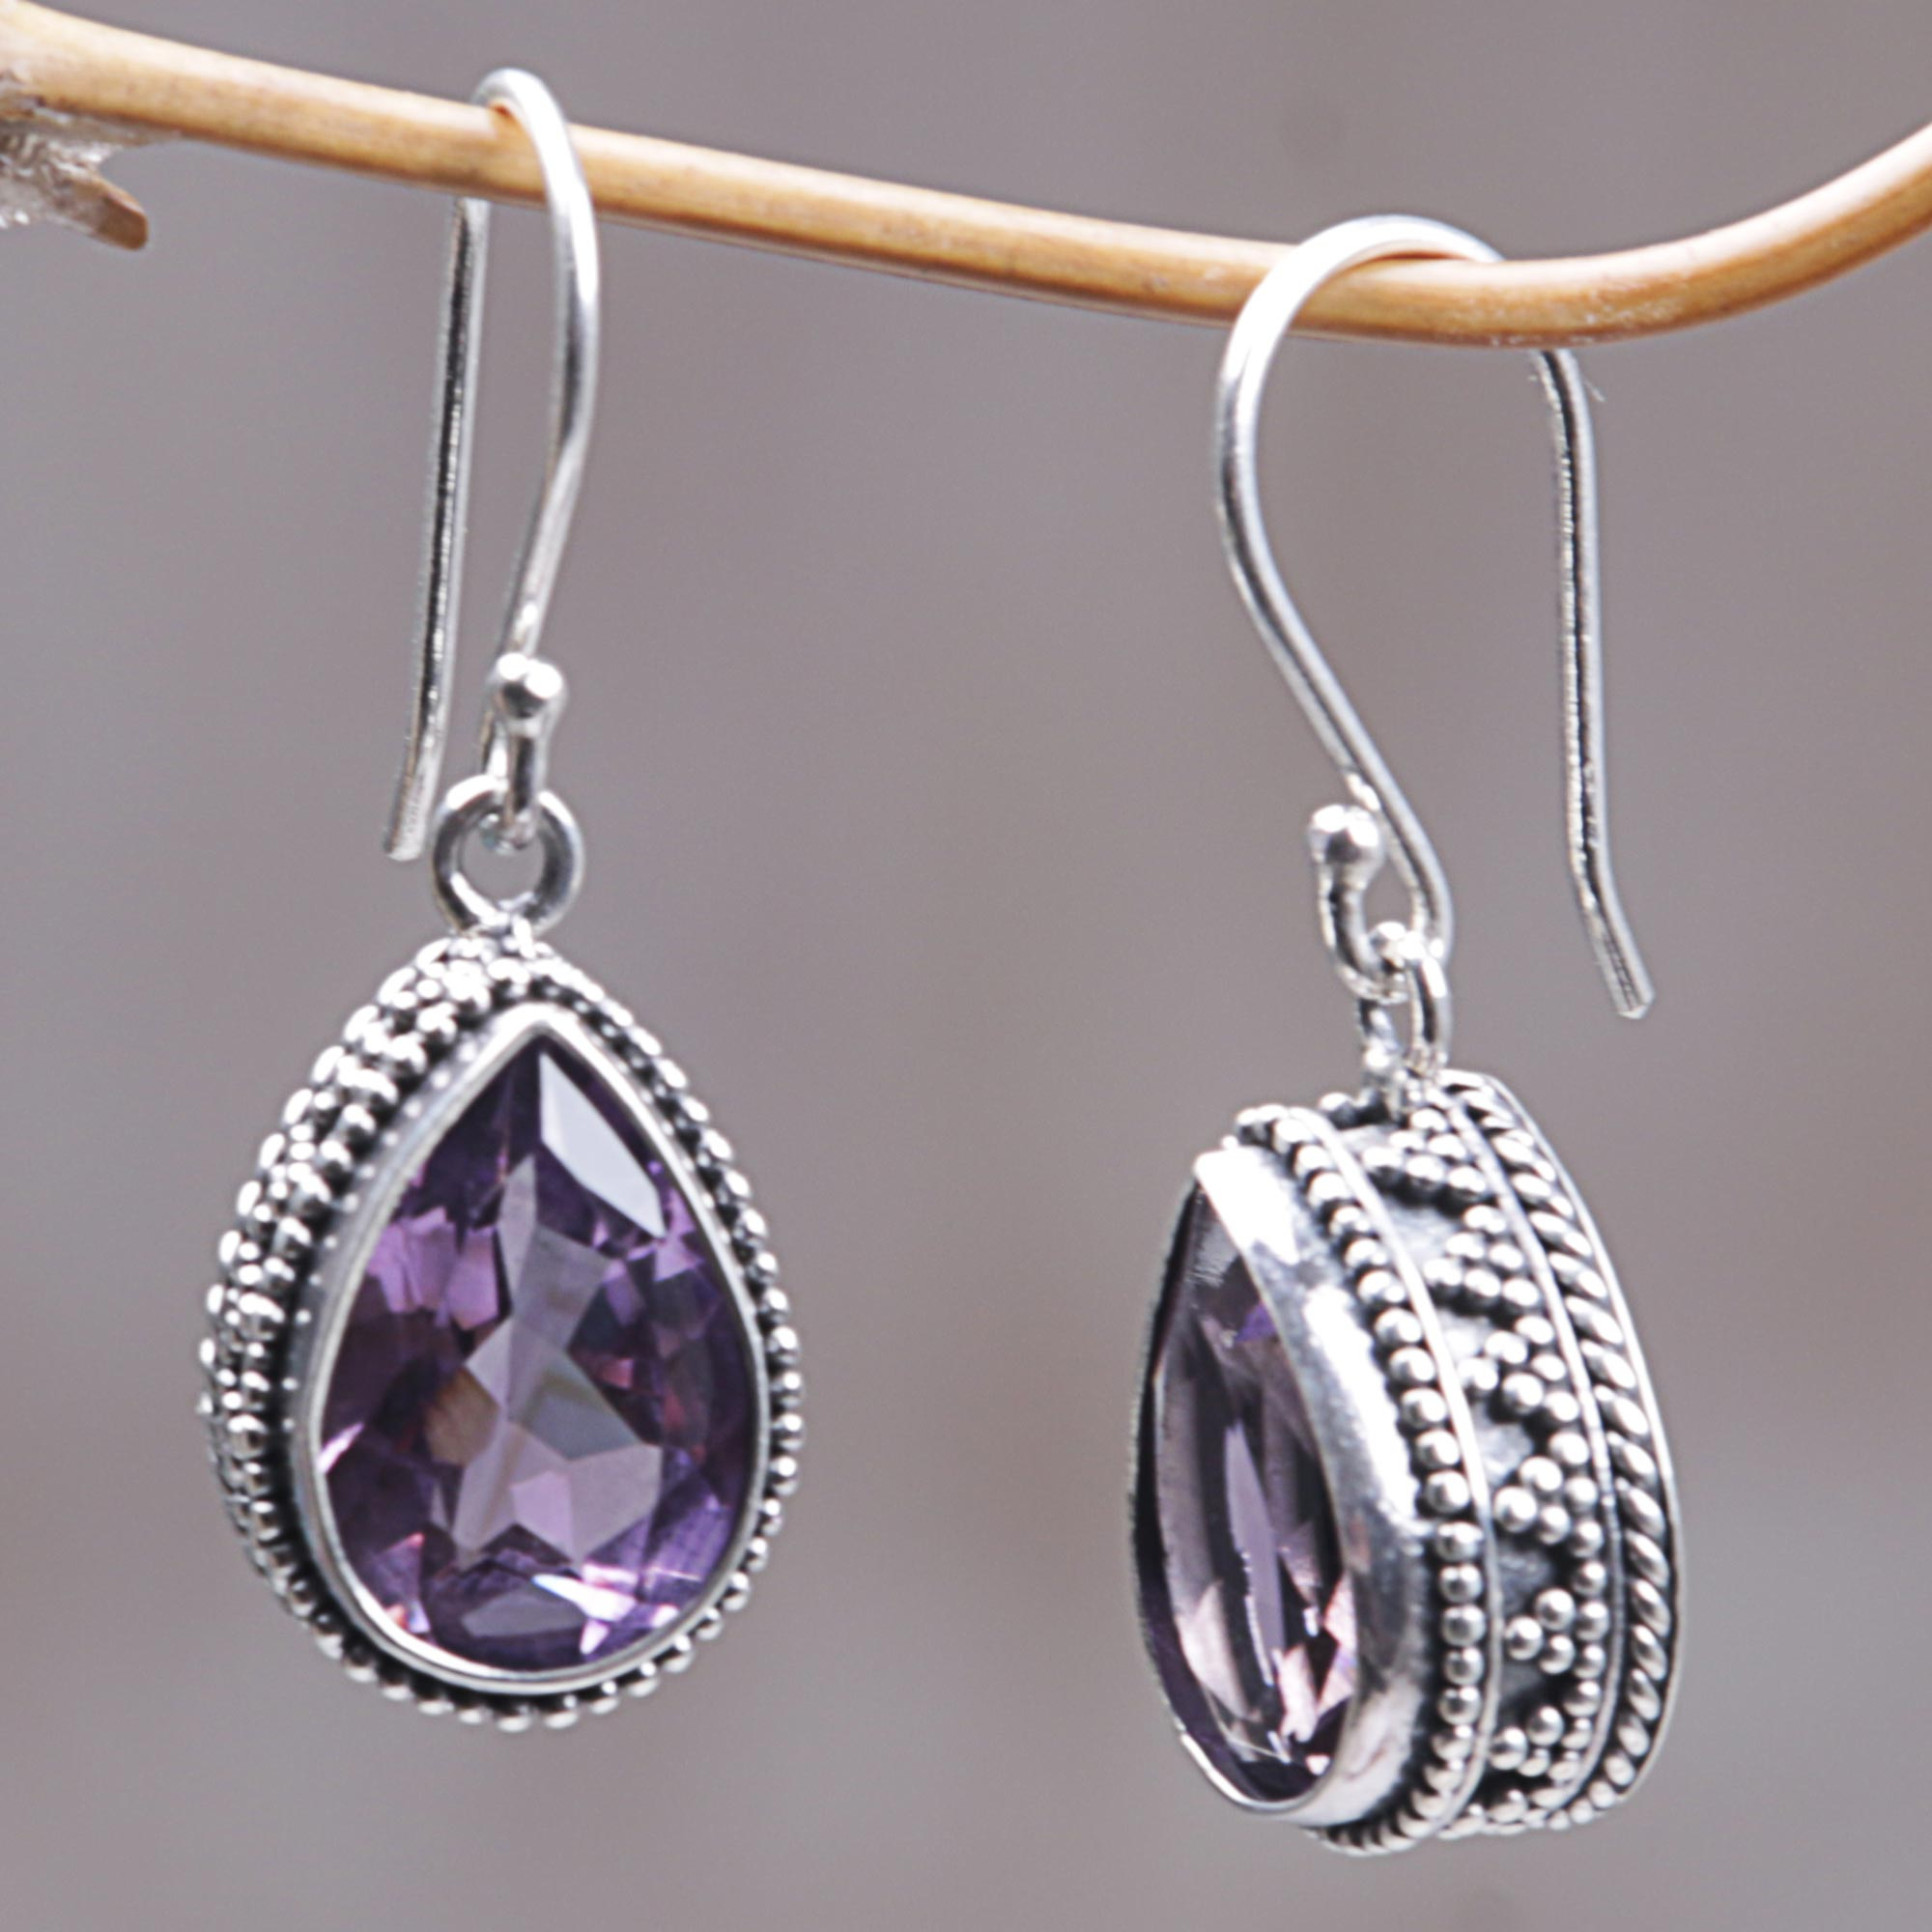 UNICEF Market | 925 Silver Earrings with Amethyst Total 8 Carats from ...